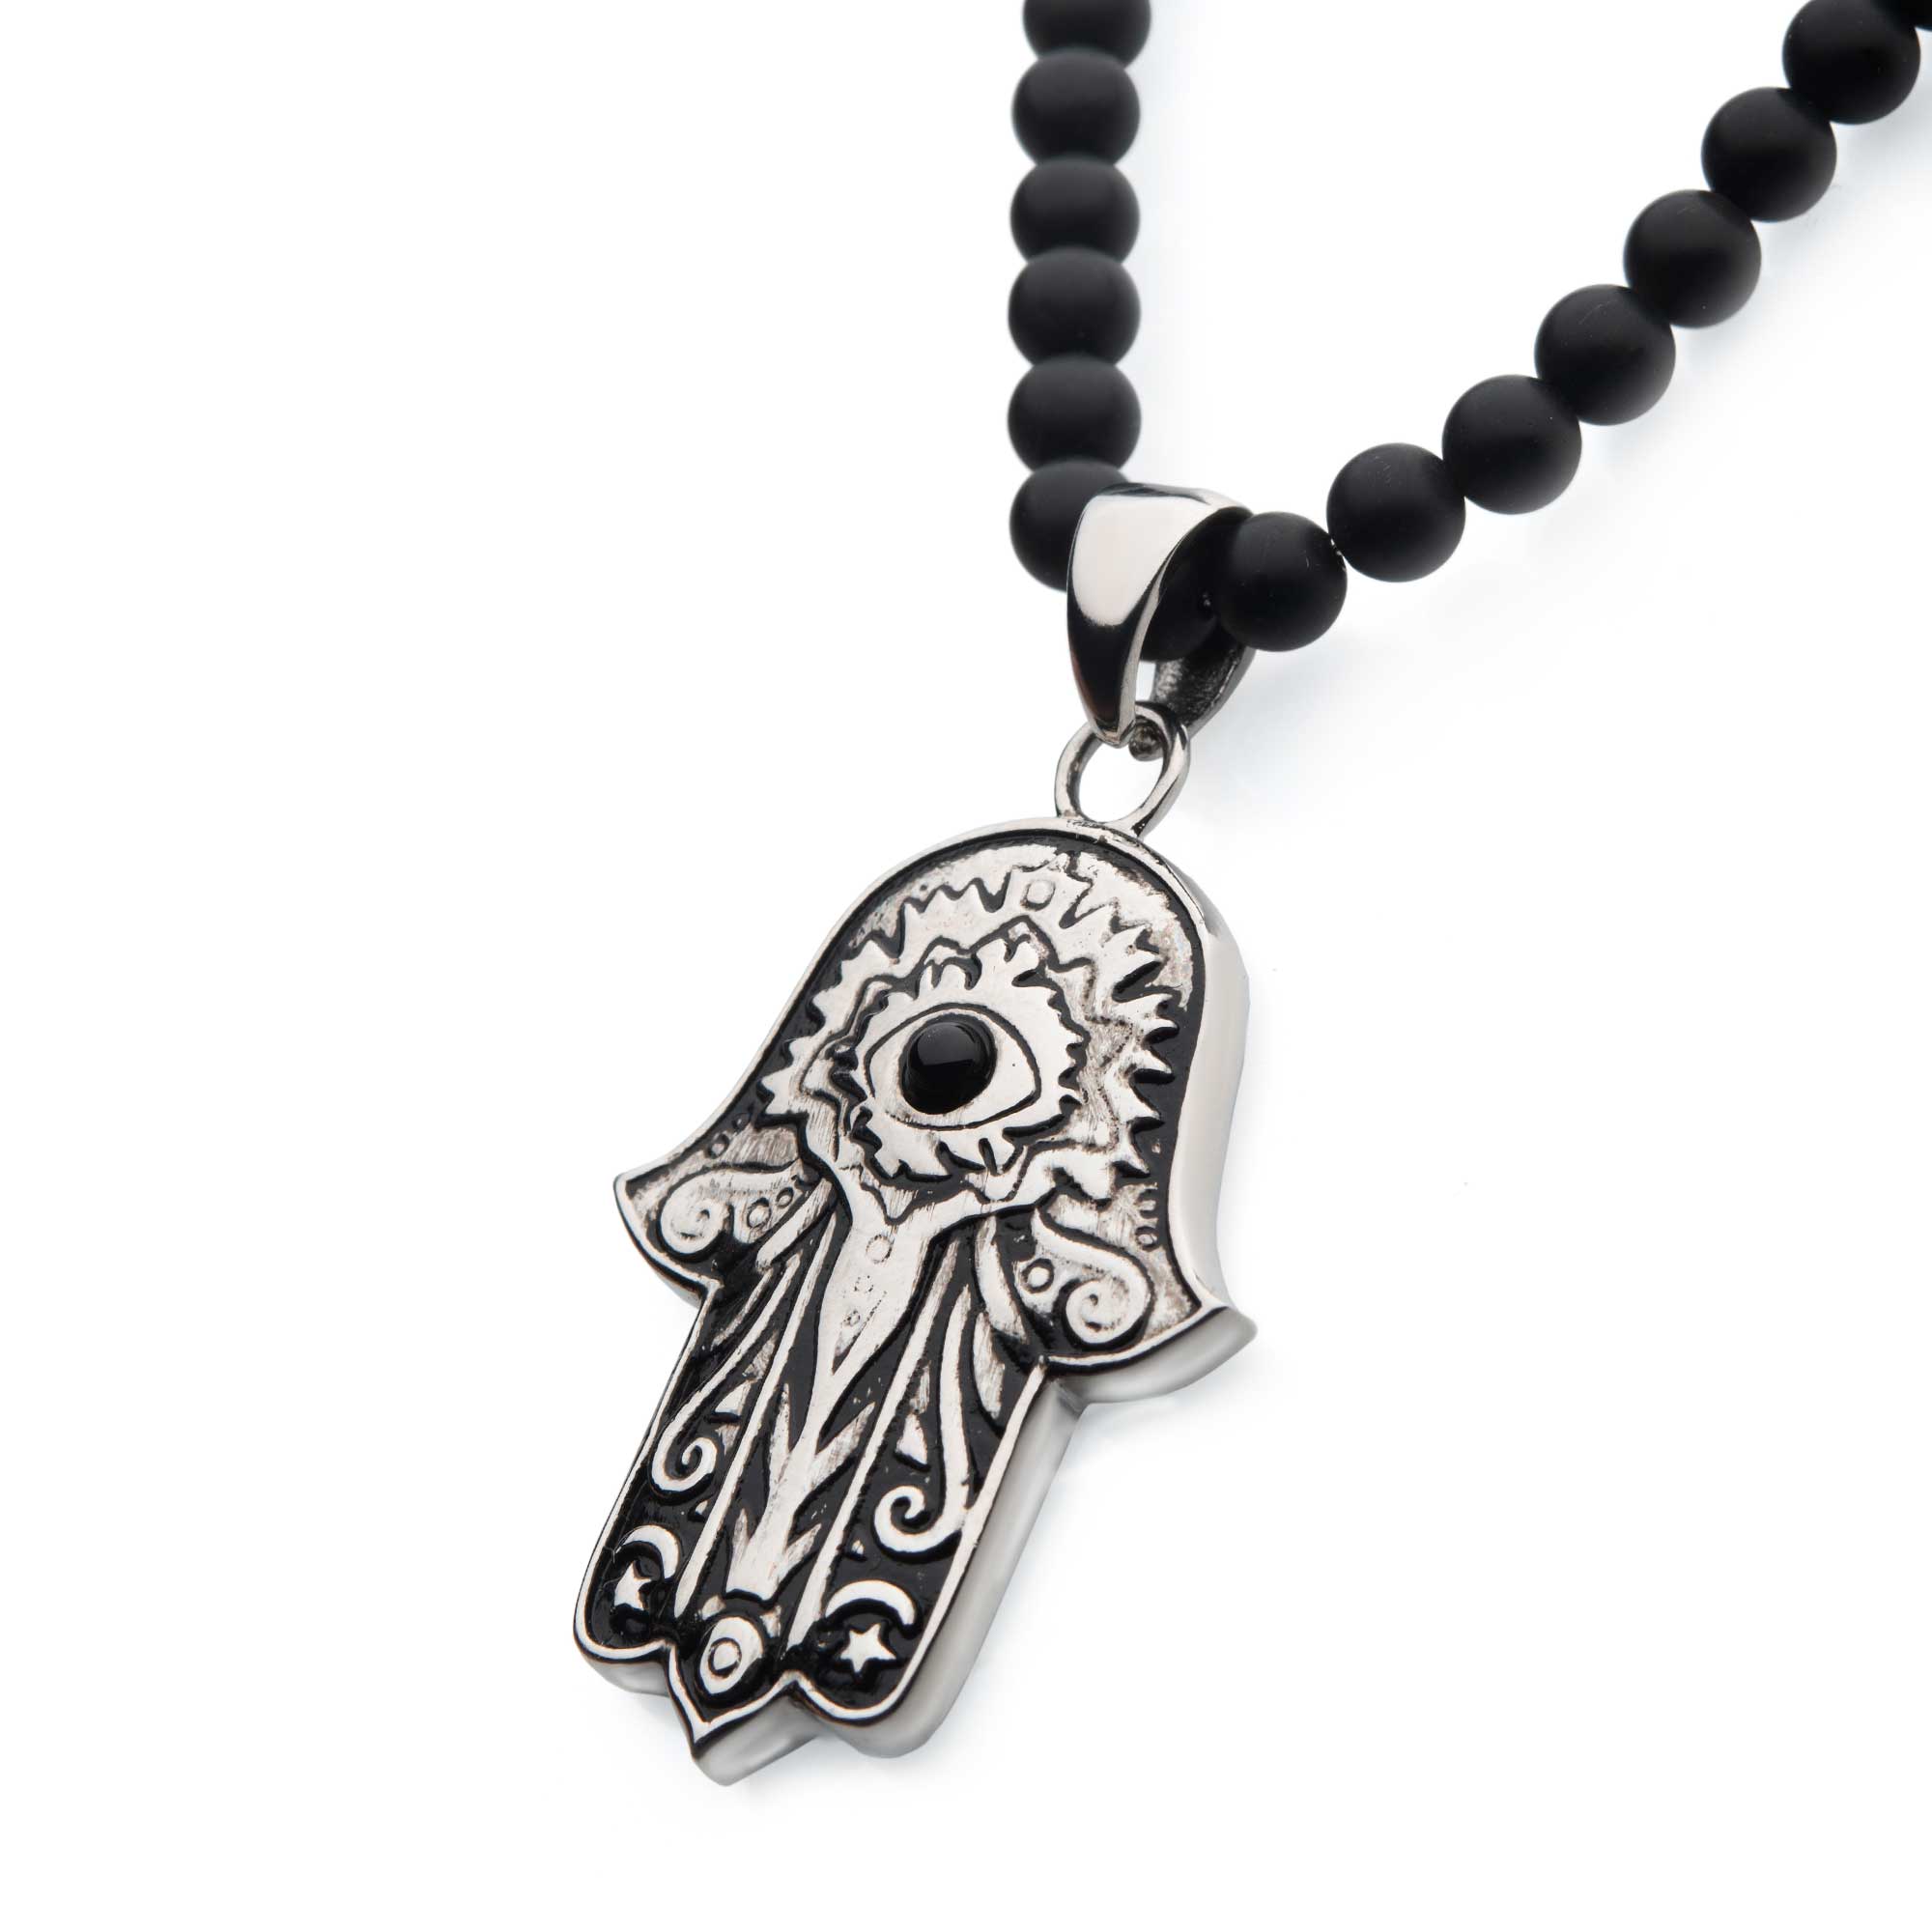 Stainless Steel with Centerpiece Black Agate Stone Hamsa Pendant, with Black Agate Stone Bead Necklace Image 2 Lewis Jewelers, Inc. Ansonia, CT